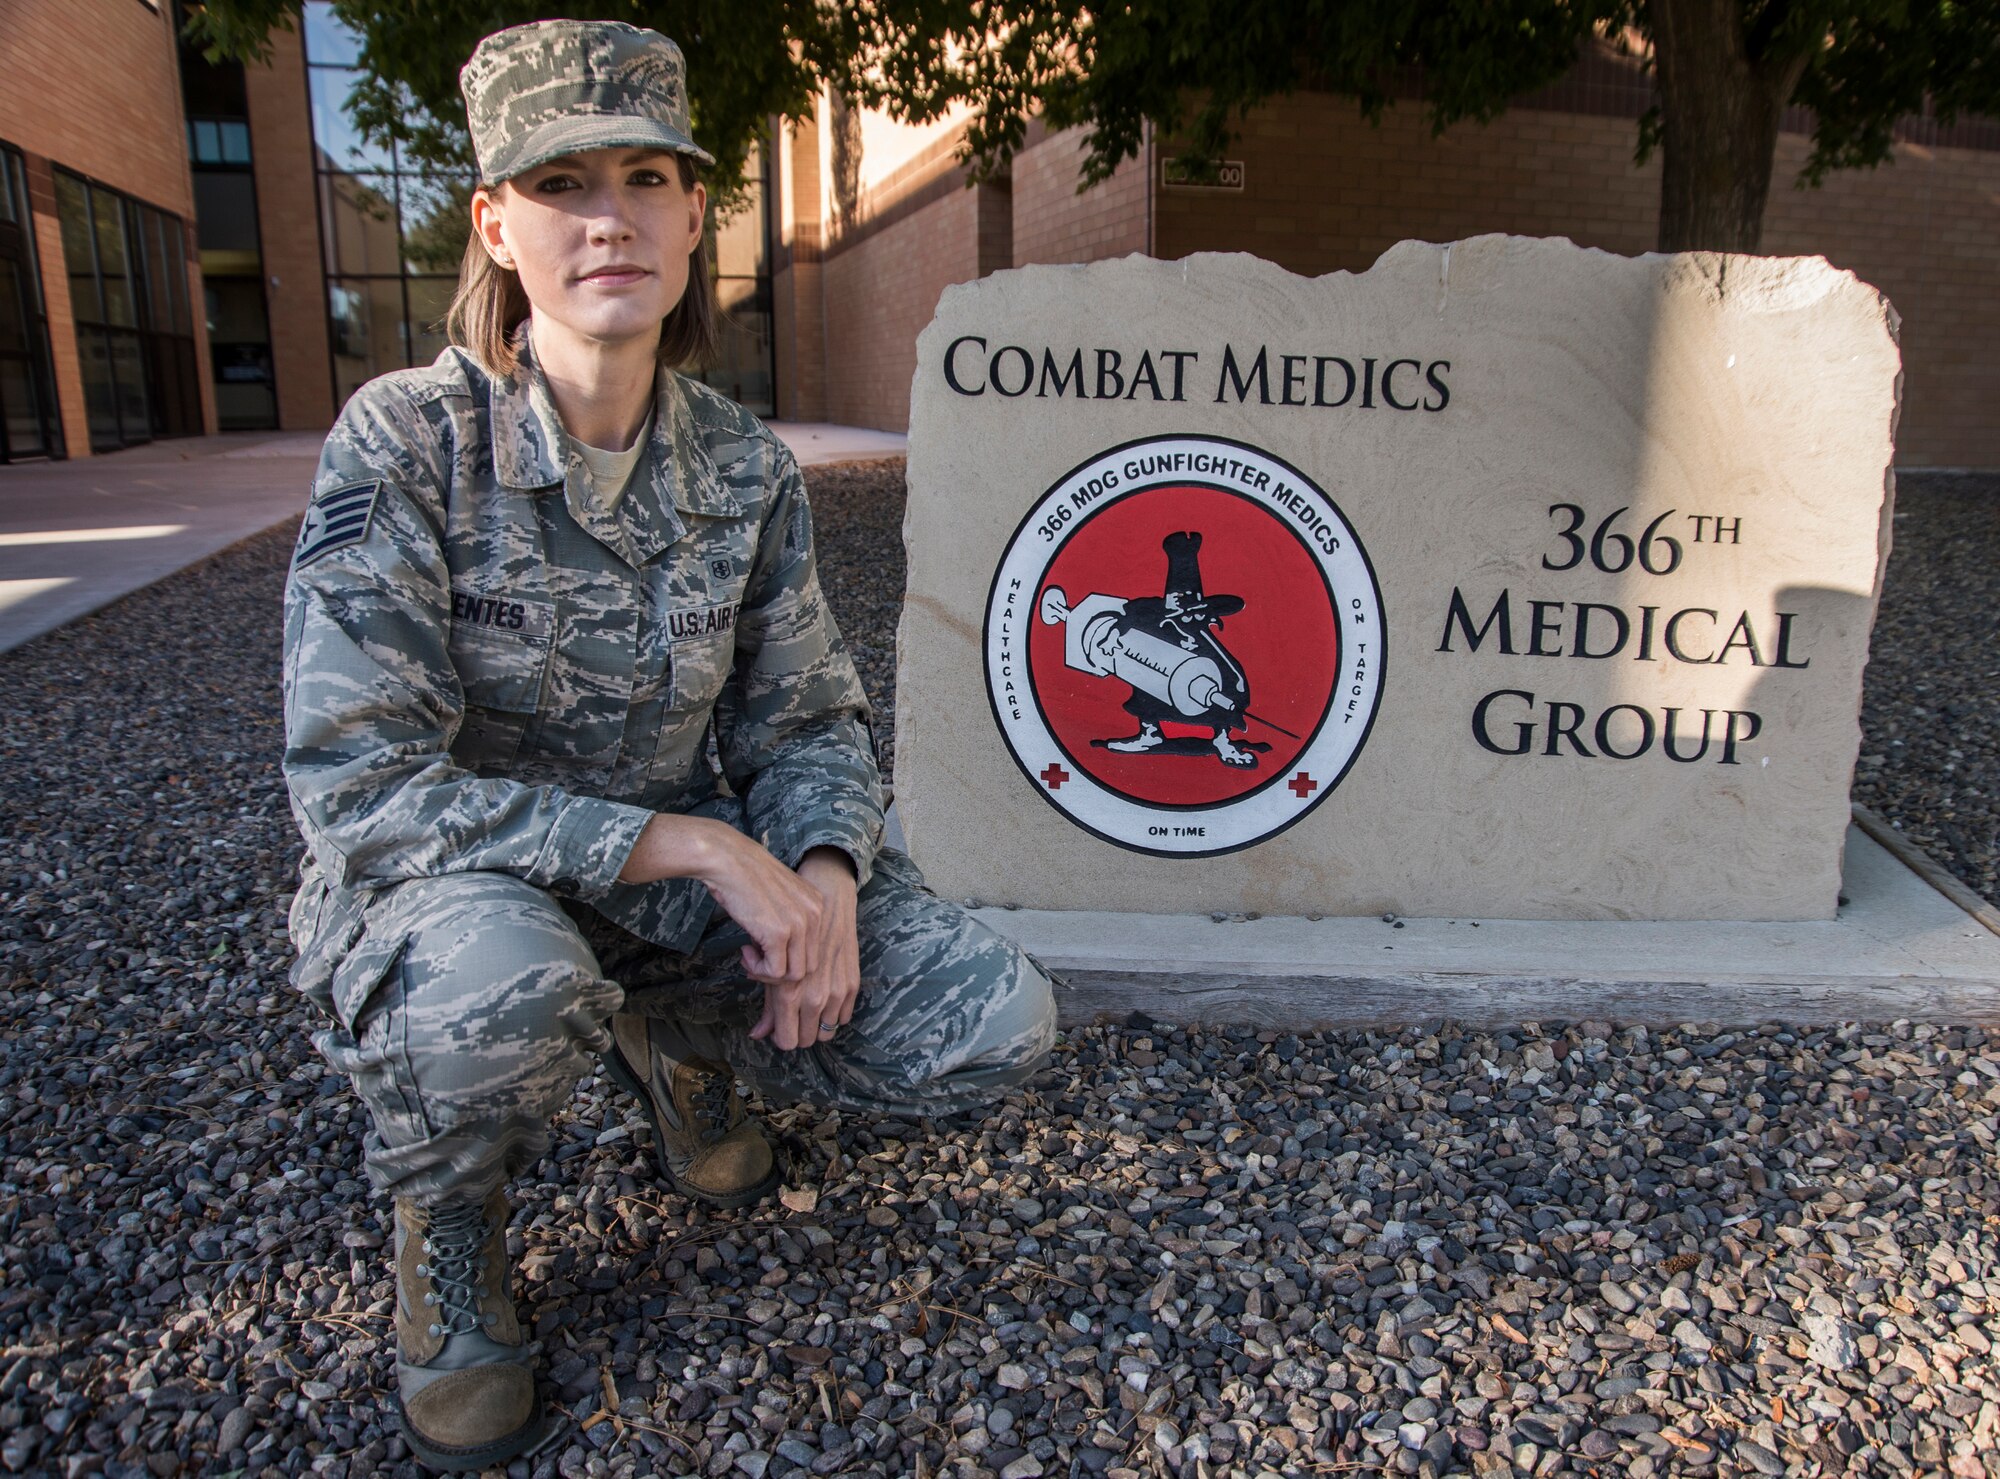 Staff Sgt. Lindsey Fuentes, 366th Medical Support Squadron biomedical equipment technician, was named one of 12 Outstanding Airmen of the Year for 2015, for Air Combat Command. An Air Force selection board at the Air Force Personnel Center considered 35 nominees who represented major commands, direct reporting units, field operating agencies and Headquarters Air Force. The board selected 12 Airmen based on superior leadership, job performance and personal achievements. (U.S. Air Force photo by Roy Lynch III)